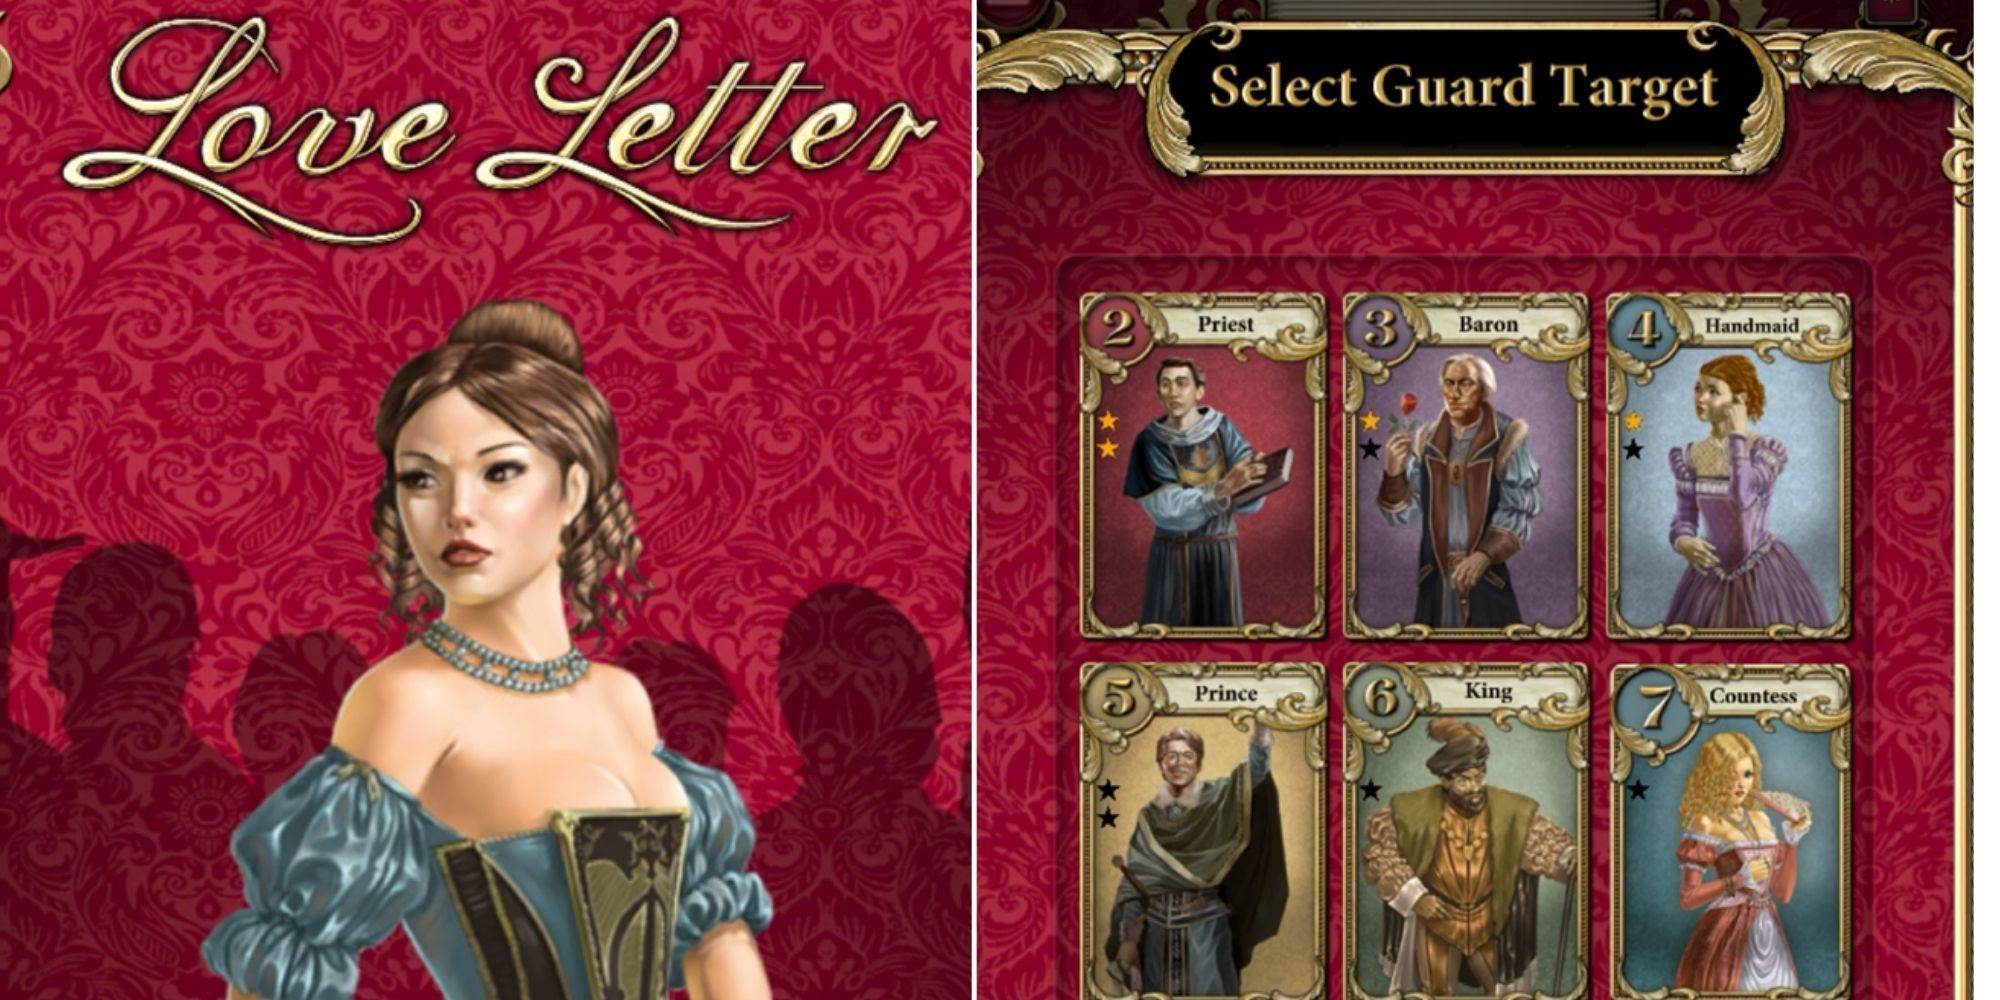 Love Letter Menu - Playing as the Guard and selecting a card to guess